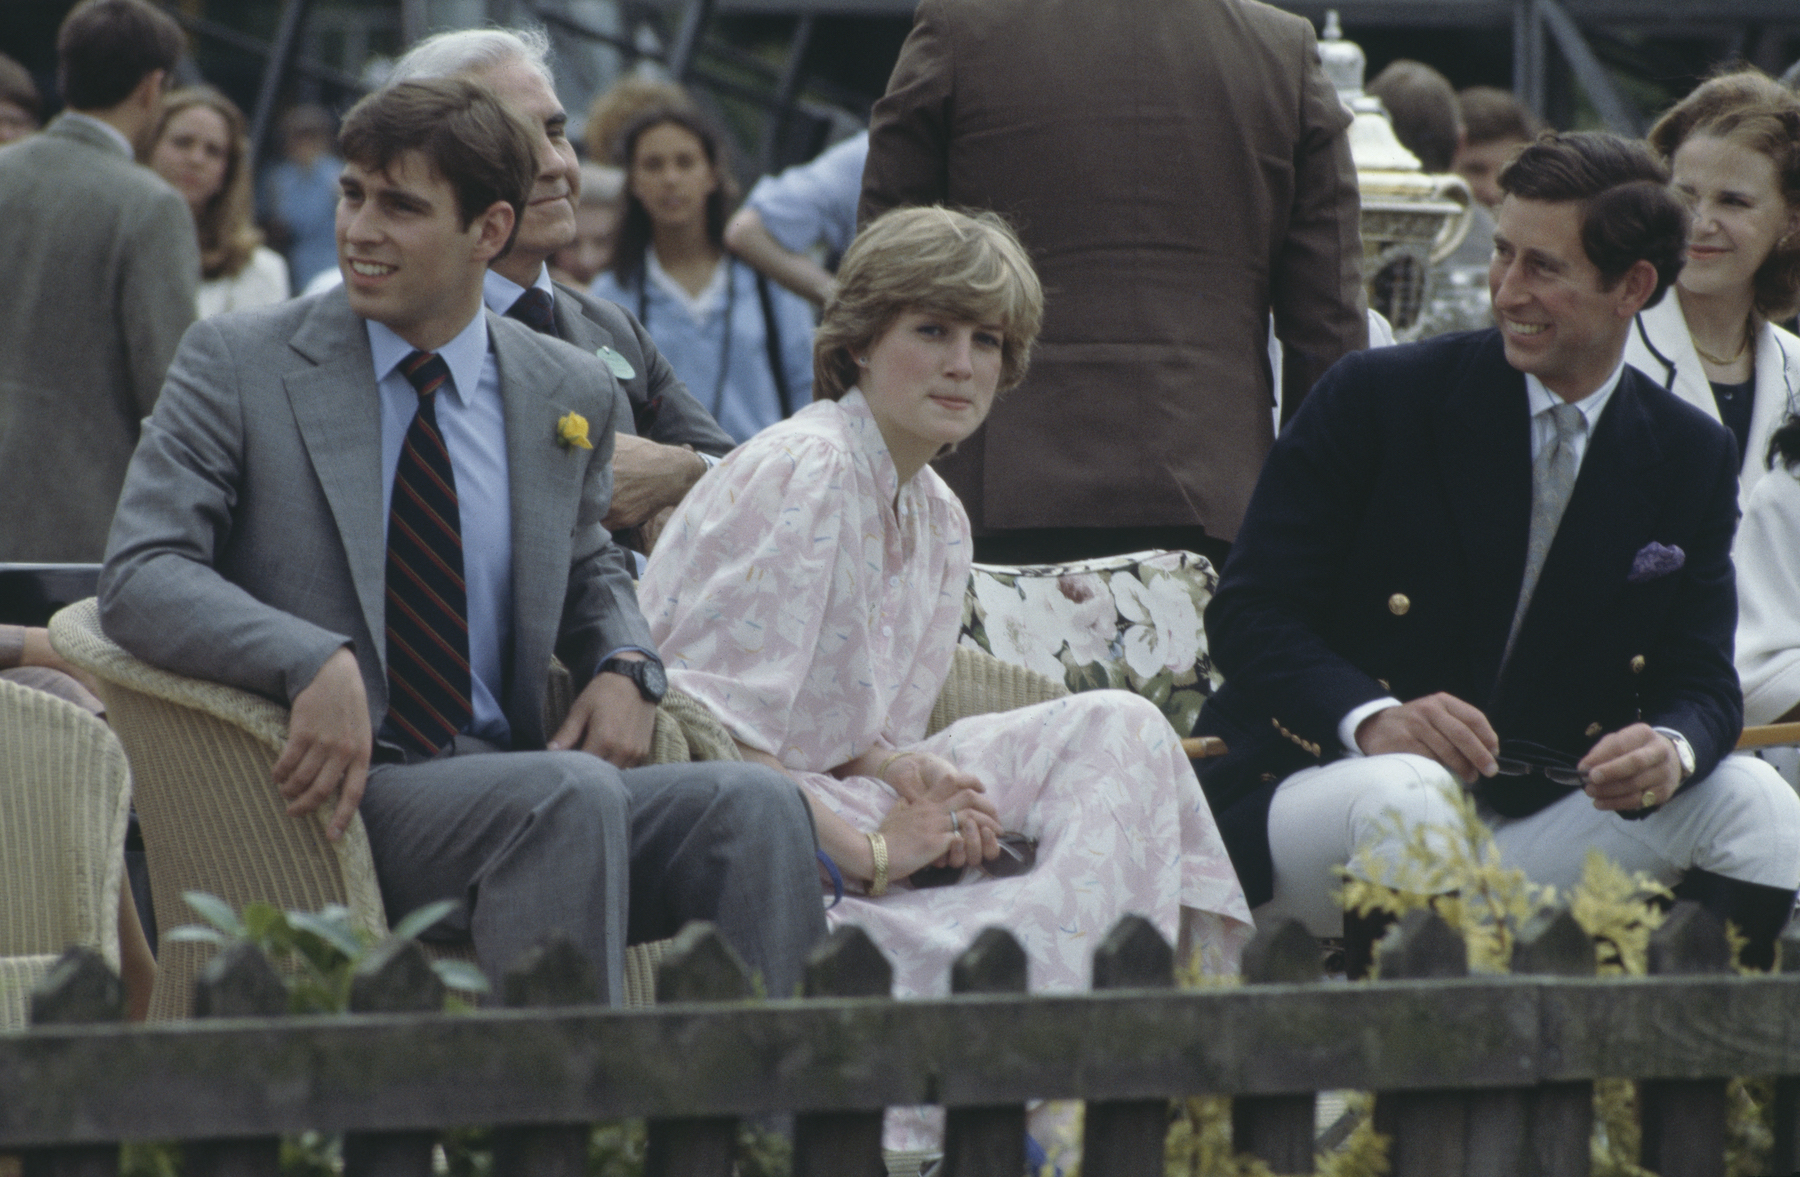 Prince Andrew, Princess Diana, and Prince Charles at a polo match